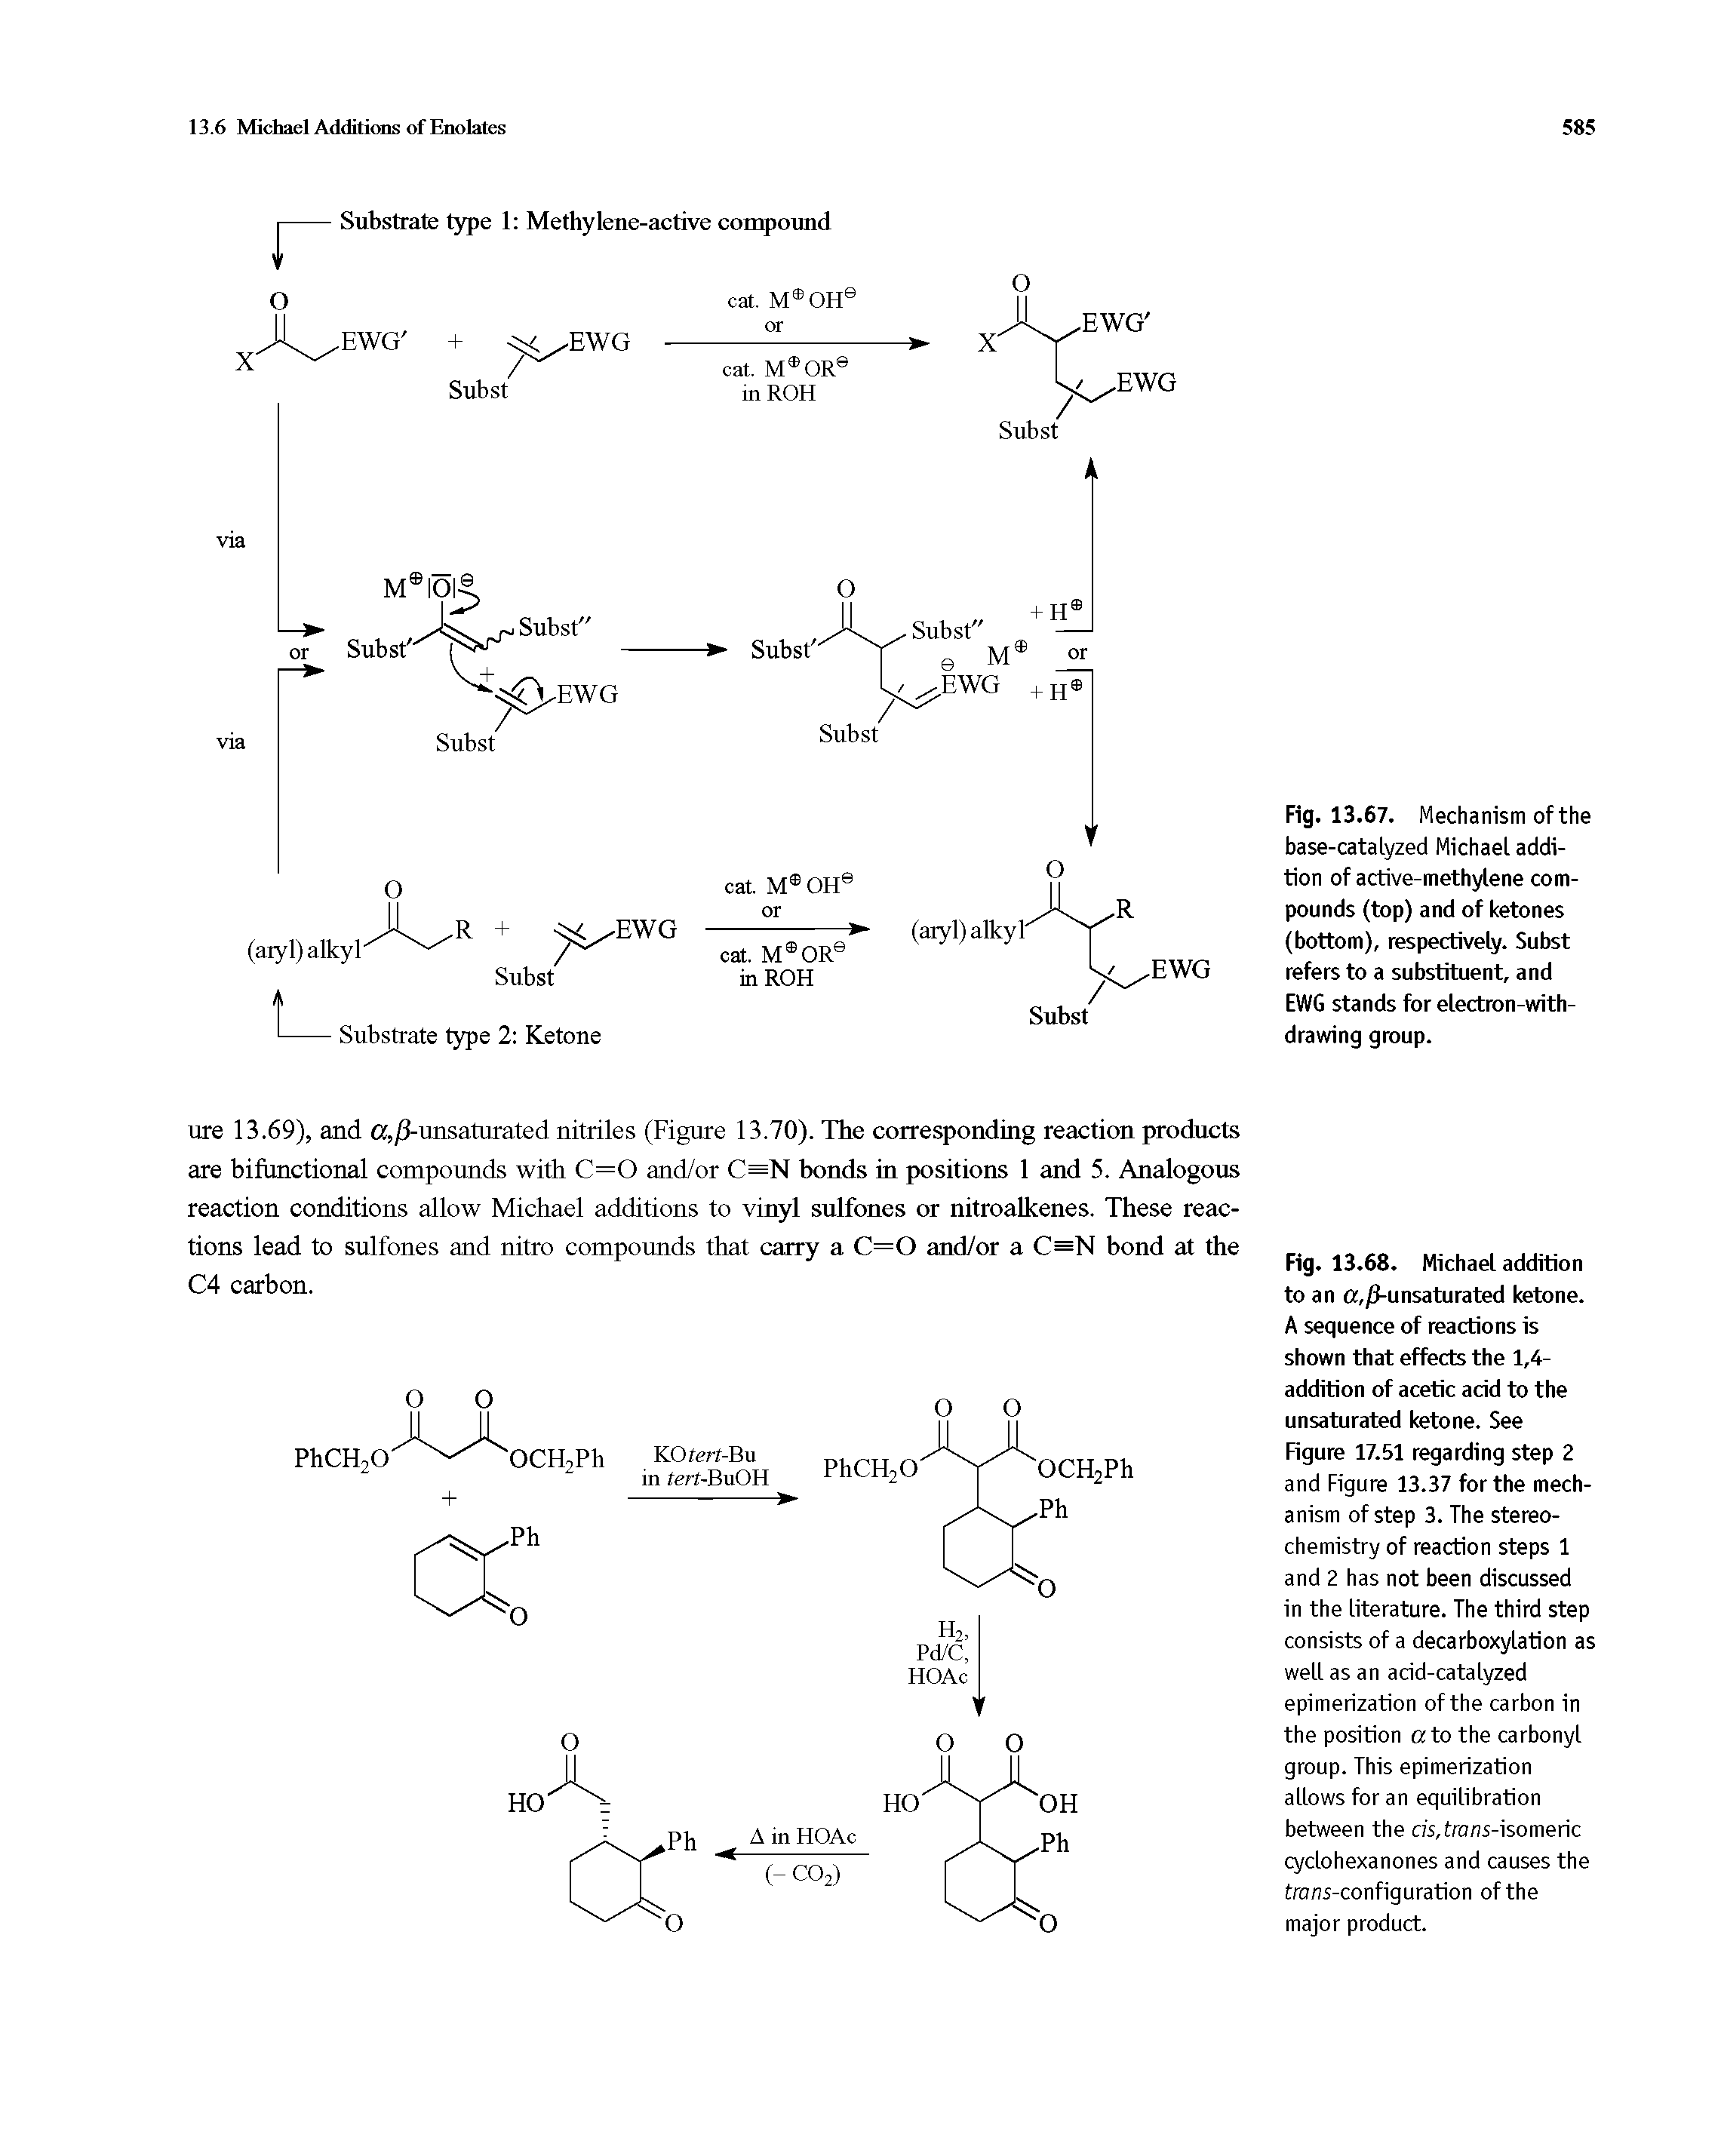 Fig. 13.68. Michael addition to an tt,/kunsaturated ketone. A sequence of reactions is shown that effects the 1,4-addition of acetic acid to the unsaturated ketone. See Figure 17.51 regarding step 2 and Figure 13.37 for the mechanism of step 3. The stereochemistry of reaction steps 1 and 2 has not been discussed in the literature. The third step consists of a decarboxylation as well as an acid-catalyzed epimerization of the carbon in the position a to the carbonyl group. This epimerization allows for an equilibration between the cis,trans-isomeric cyclohexanones and causes the trans-configuration of the major product.